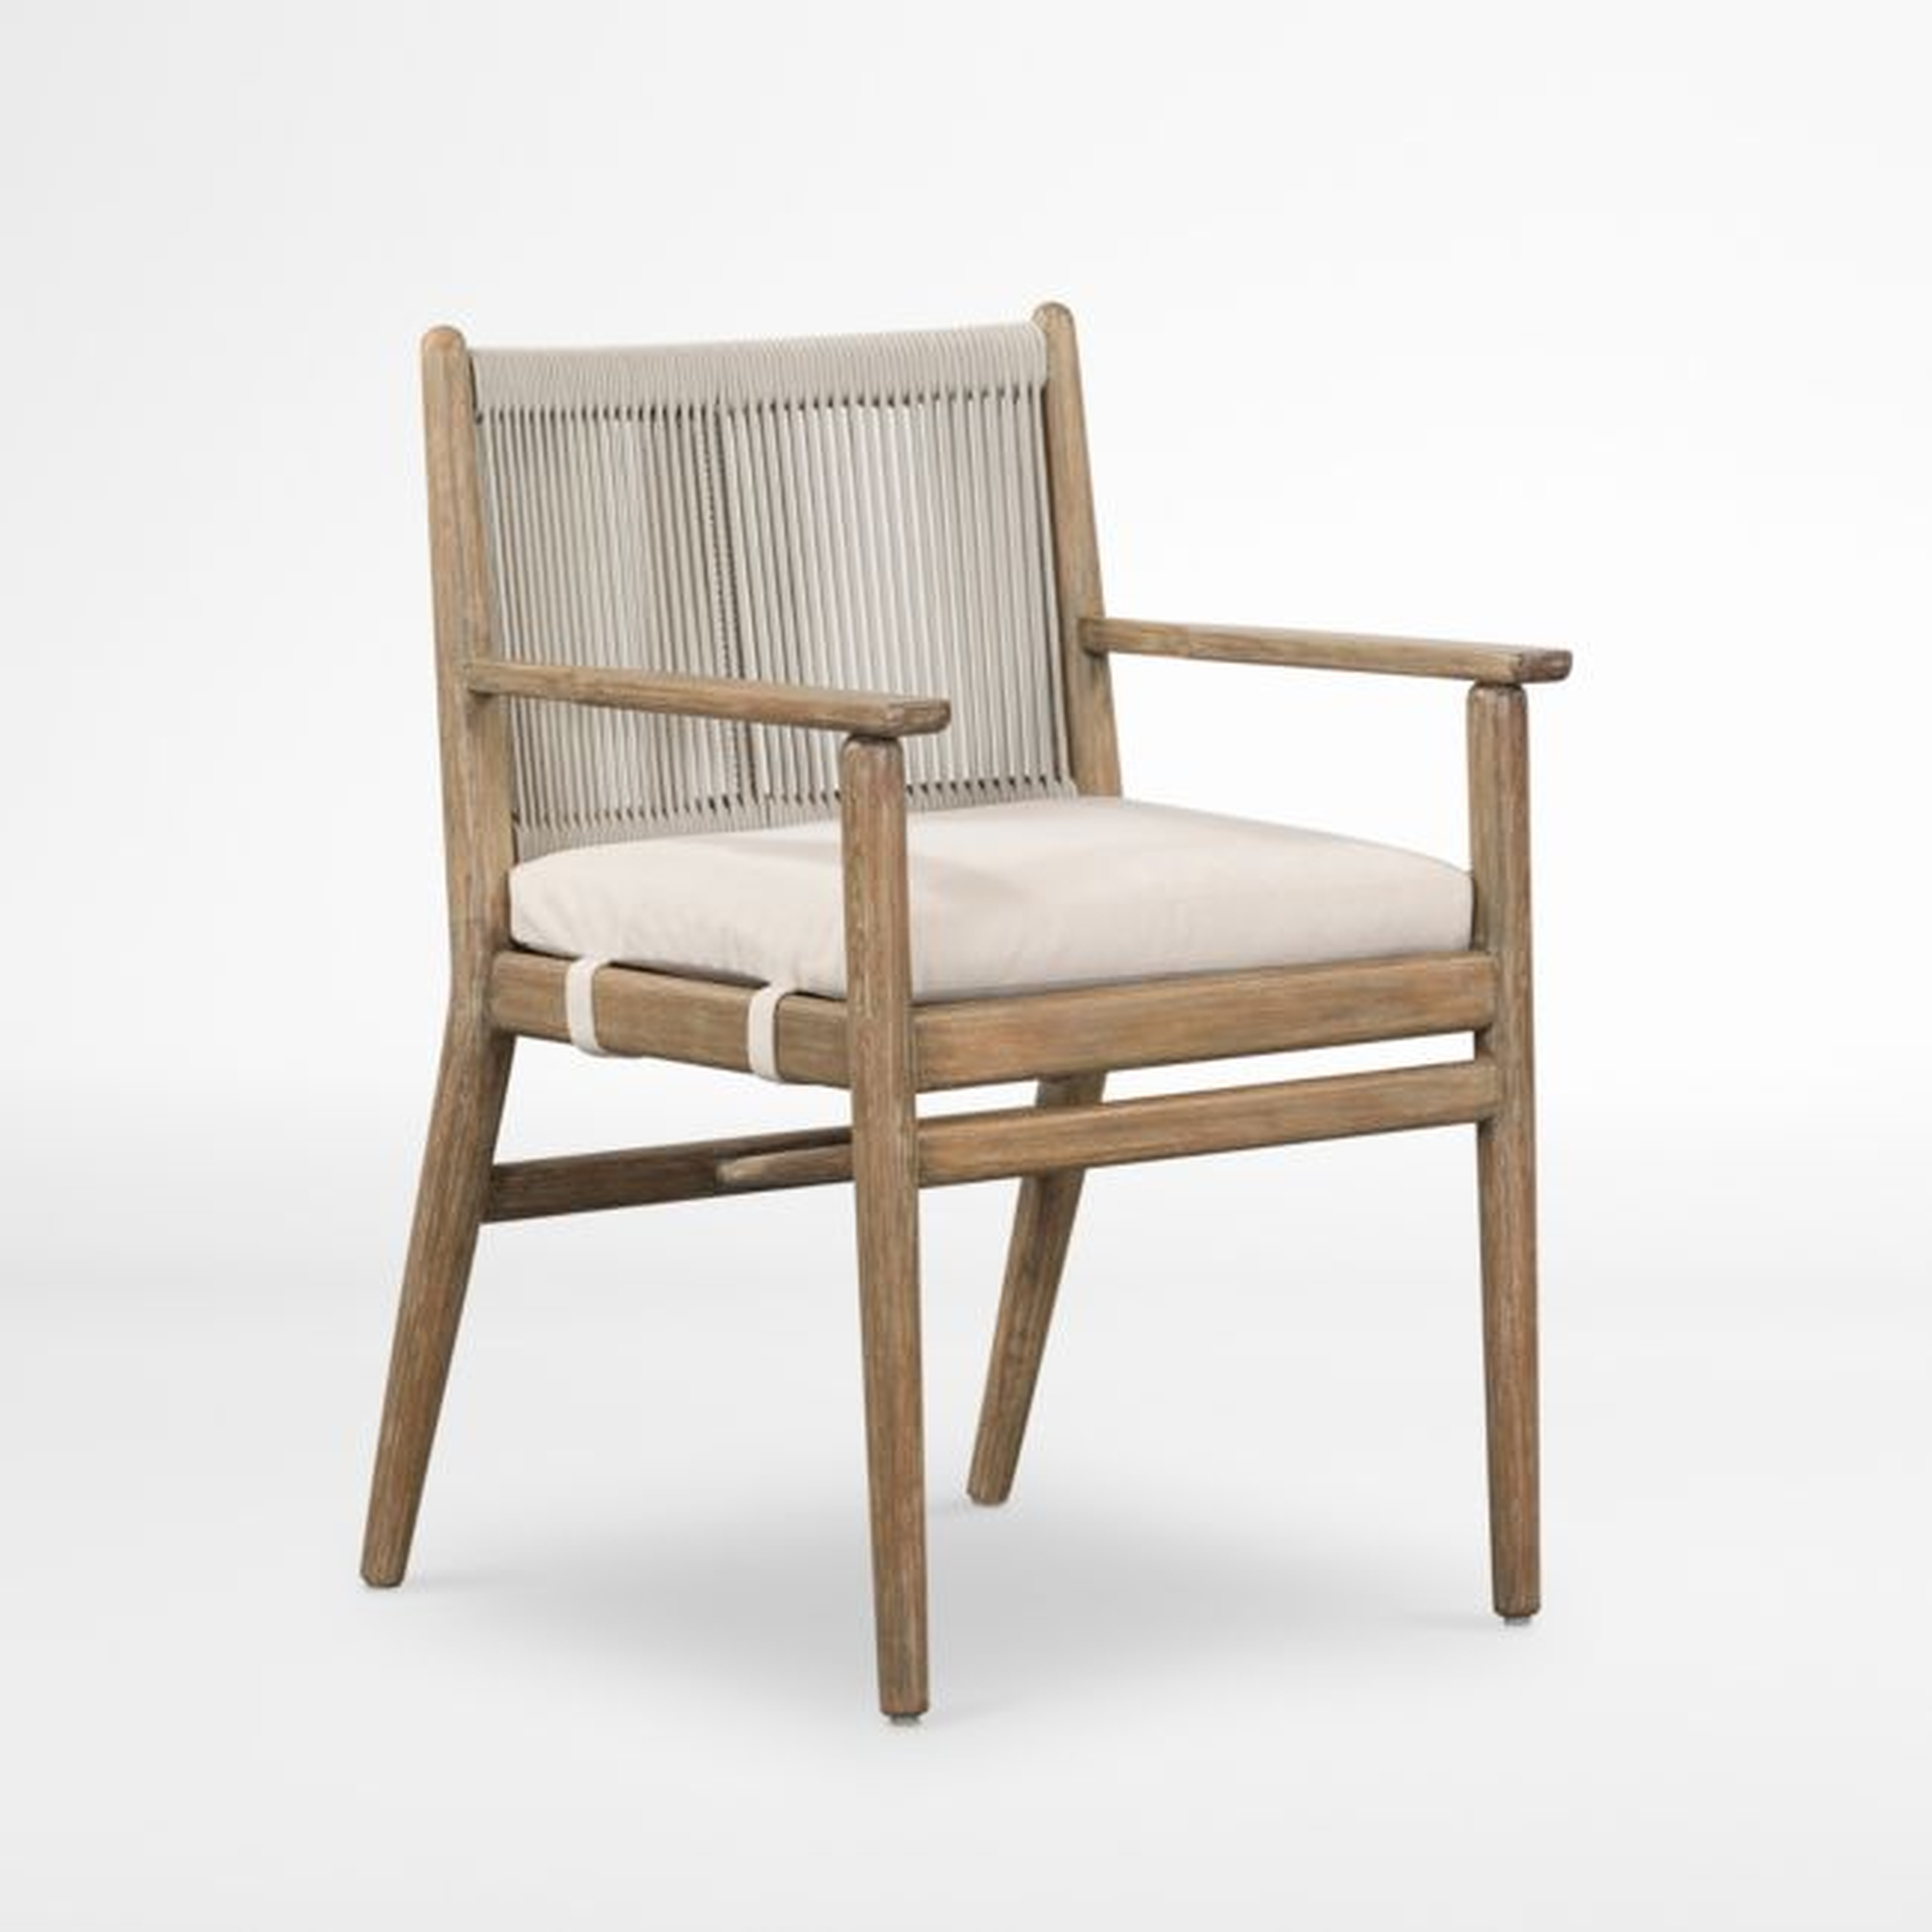 Oakmont Outdoor Dining Arm Chair - Crate and Barrel